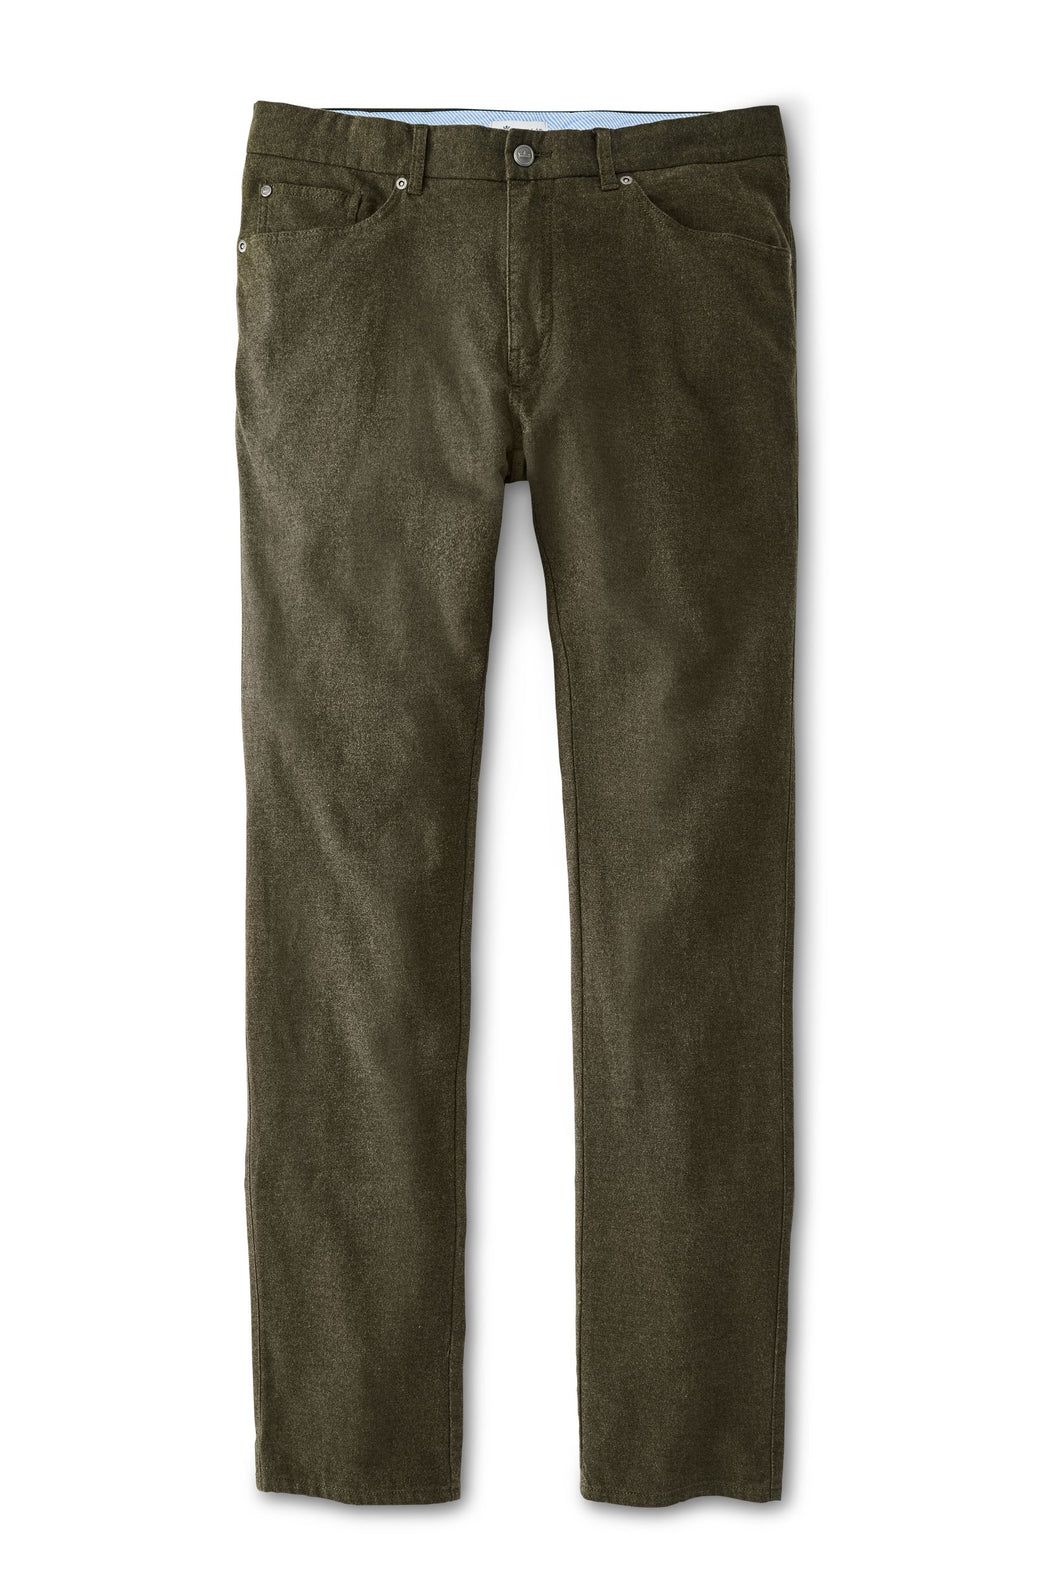 Peter Millar Cotton Flannel Five-Pocket Pant in Loden